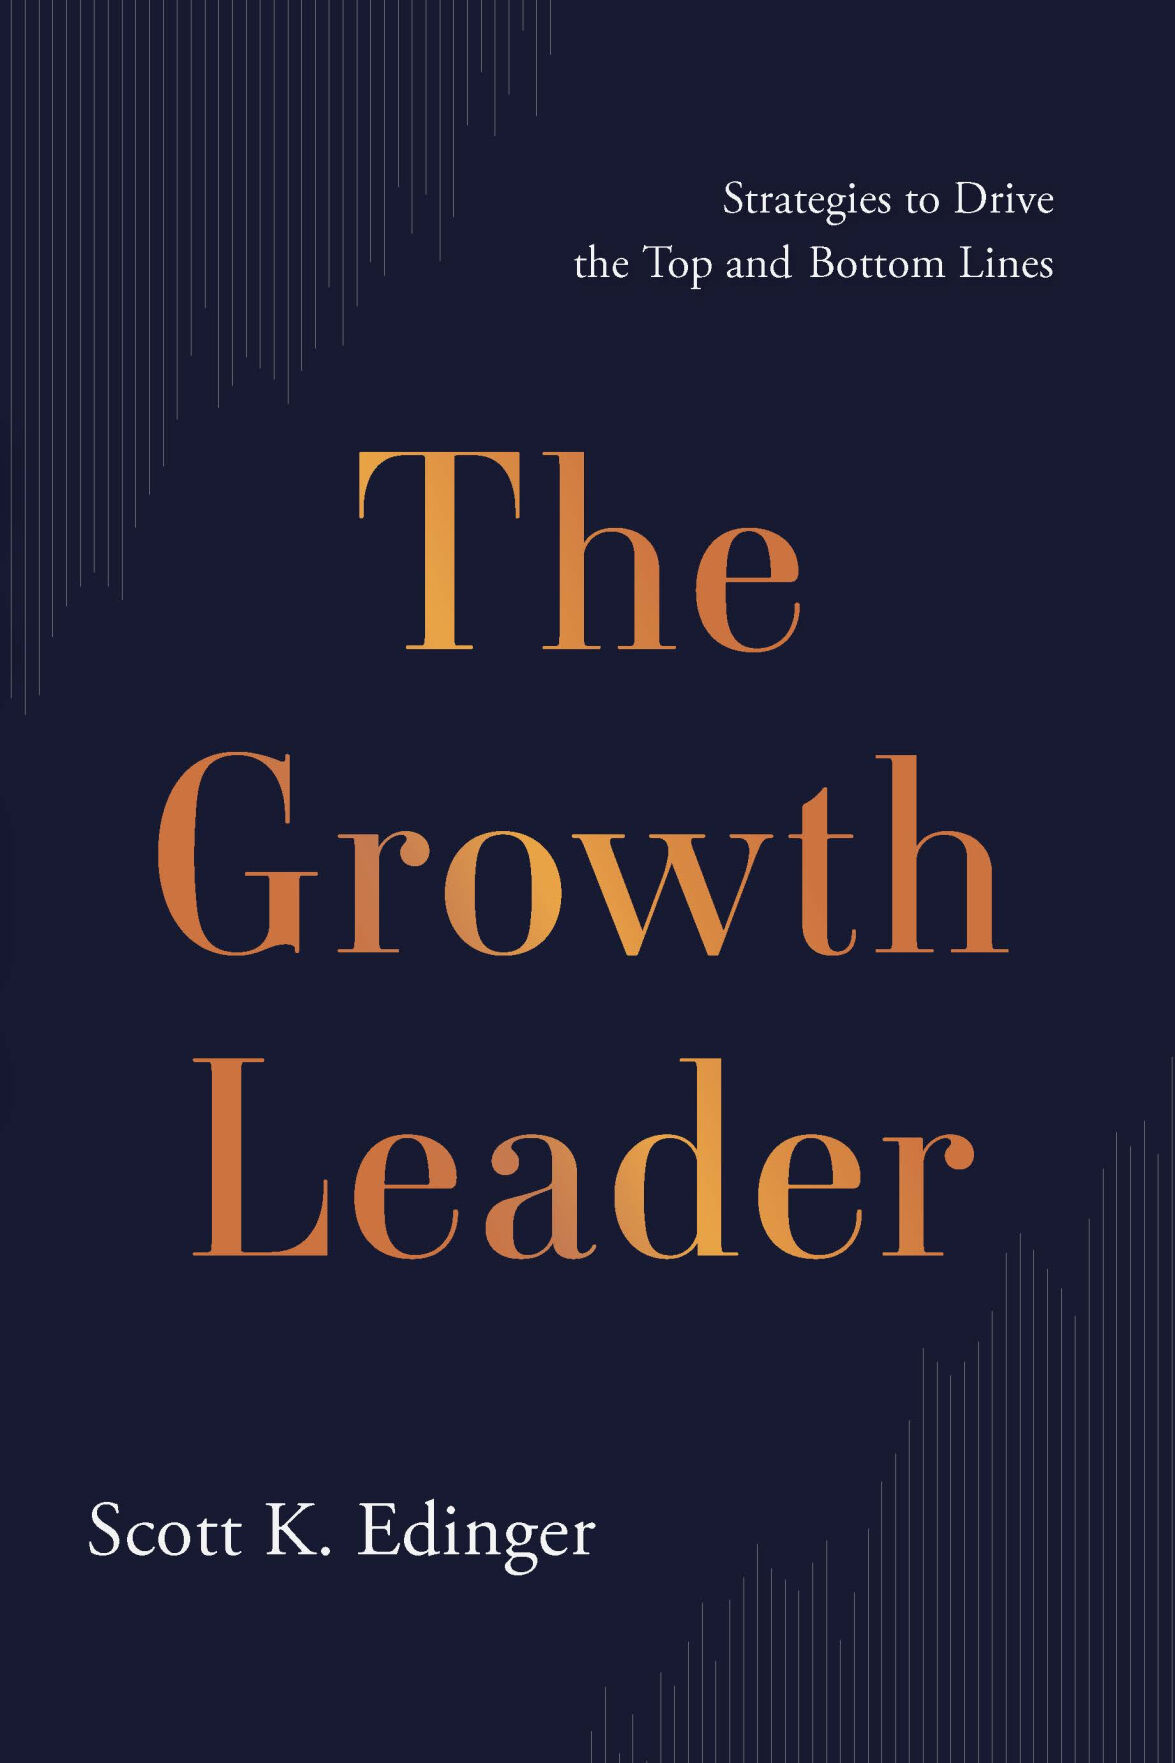 <p>The Growth Leader by Scott K. Edinger (Photo: Business Wire)</p>   PHOTO CREDIT: Business Wire